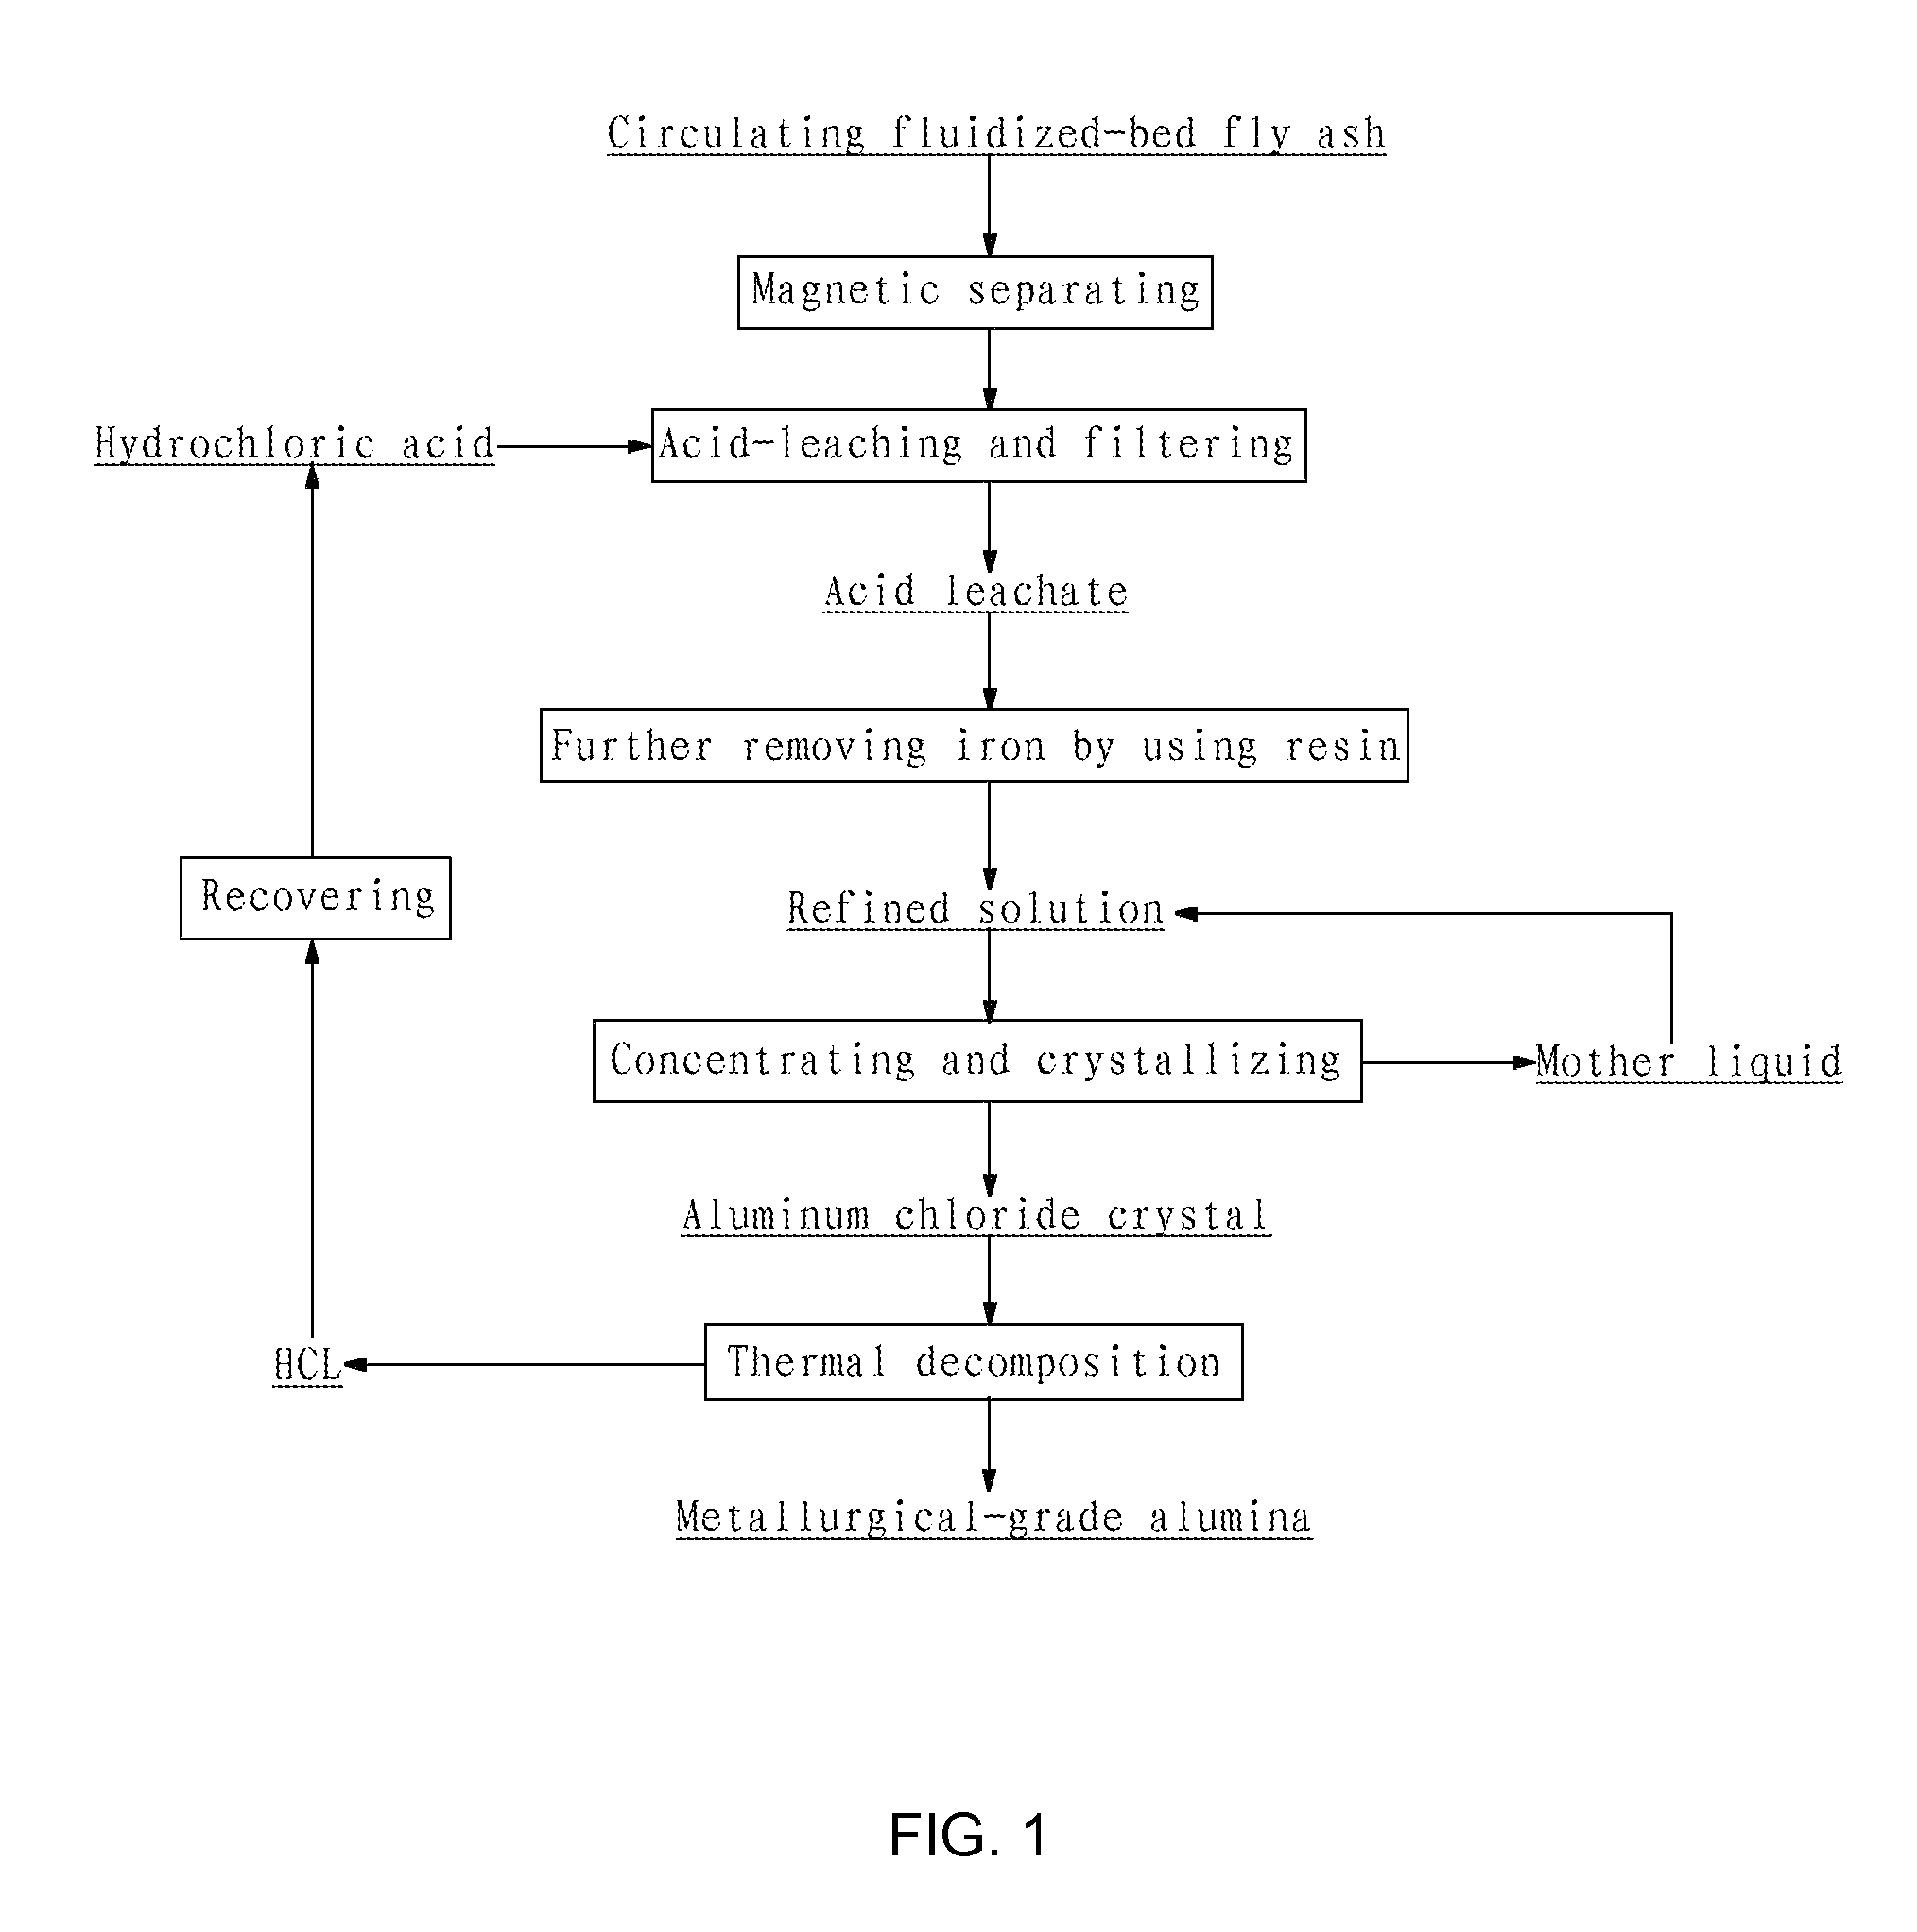 Method for preparing metallurgical-grade alumina by using fluidized bed fly ash